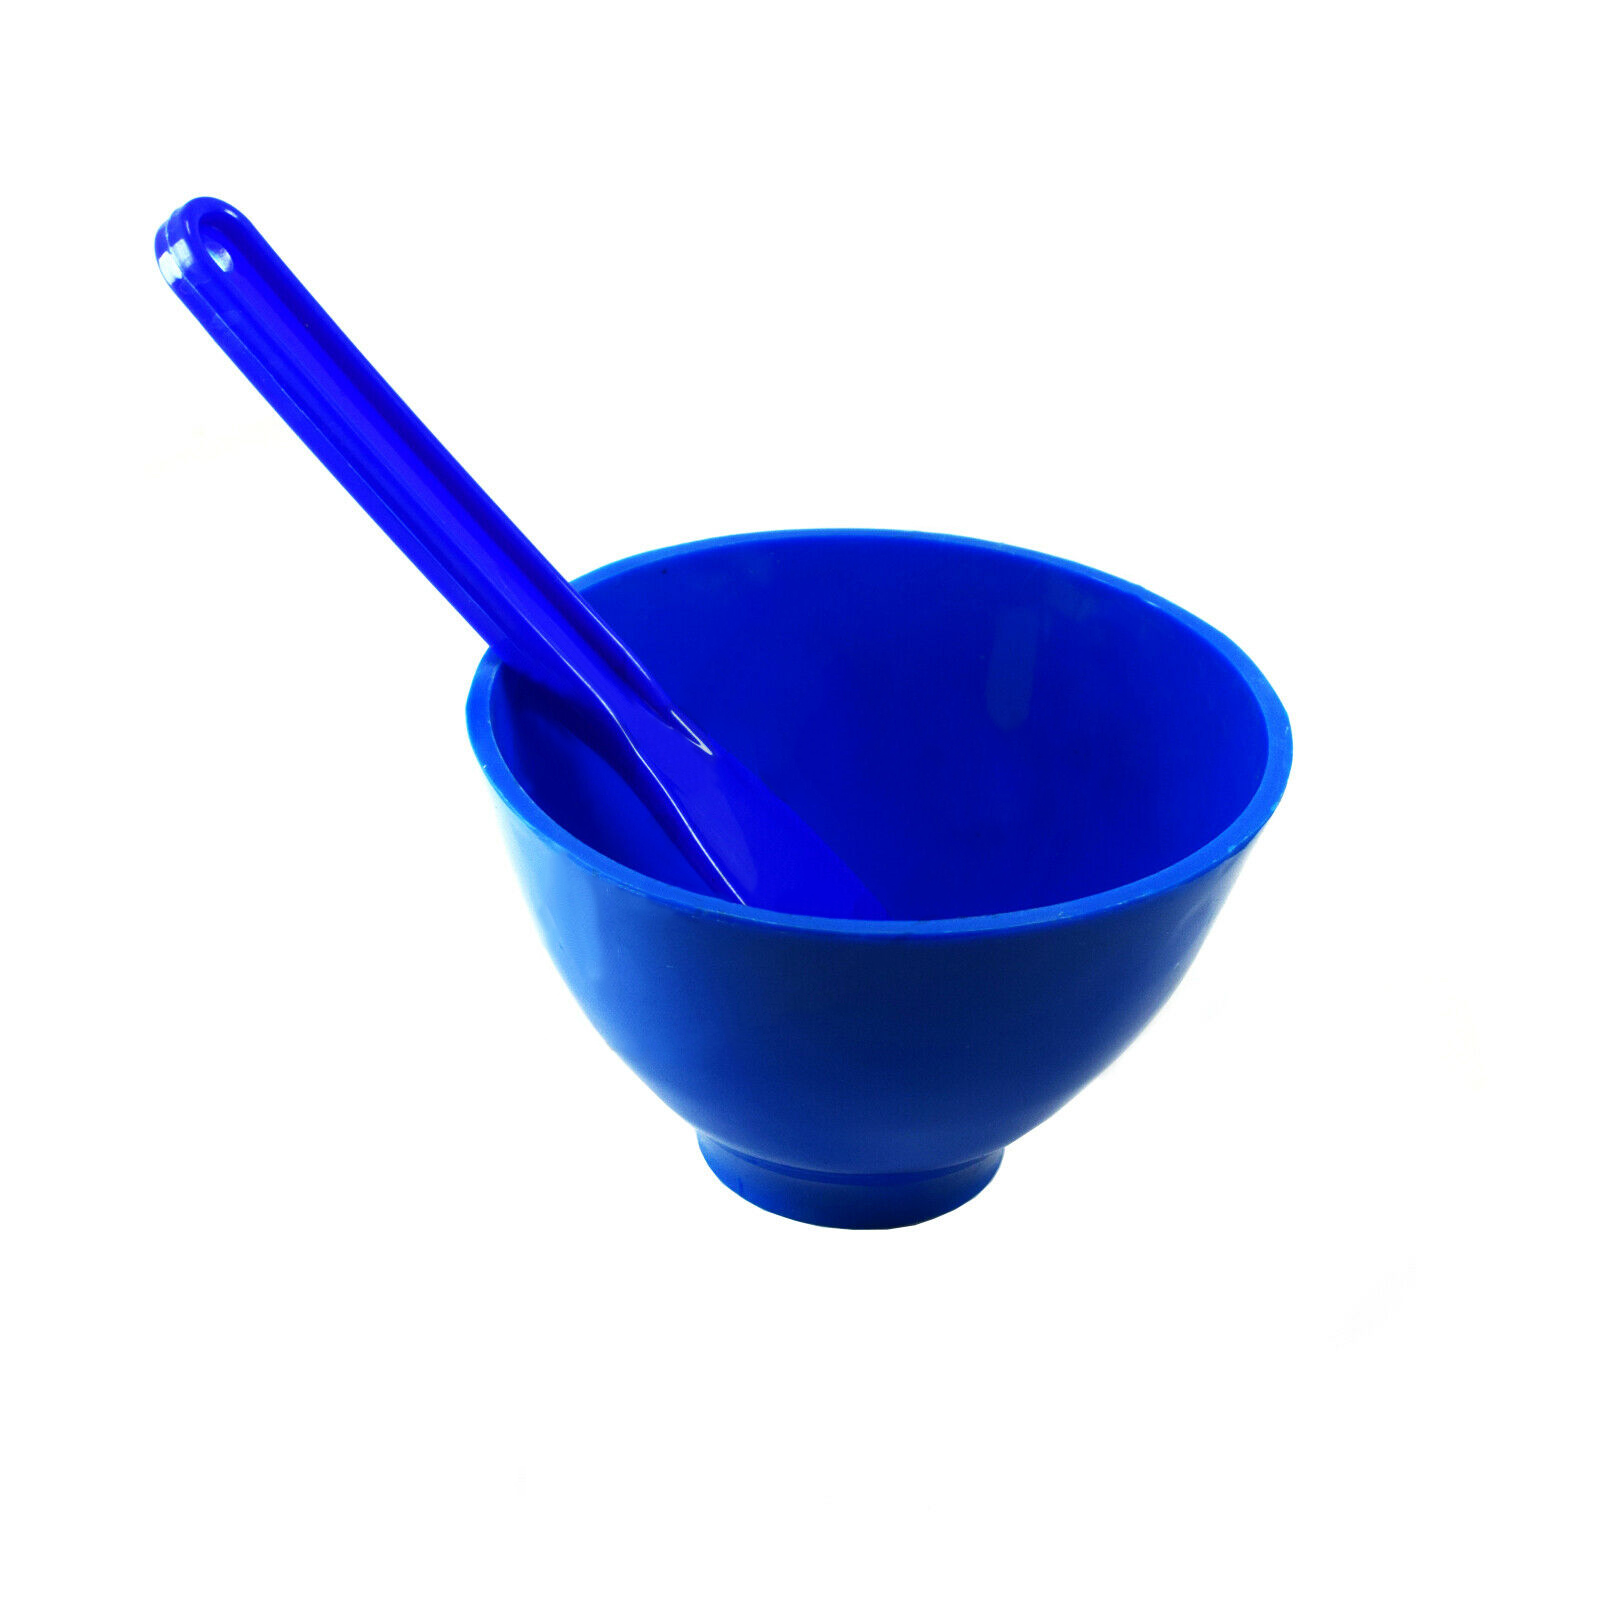 https://beadencare.com/image/cache/catalog/listing-photos/Mixing%20Bowls/Blue%20Silicon%20Mixing%20Bowl%20With%20Spoon%20%202-1600x1600.jpg